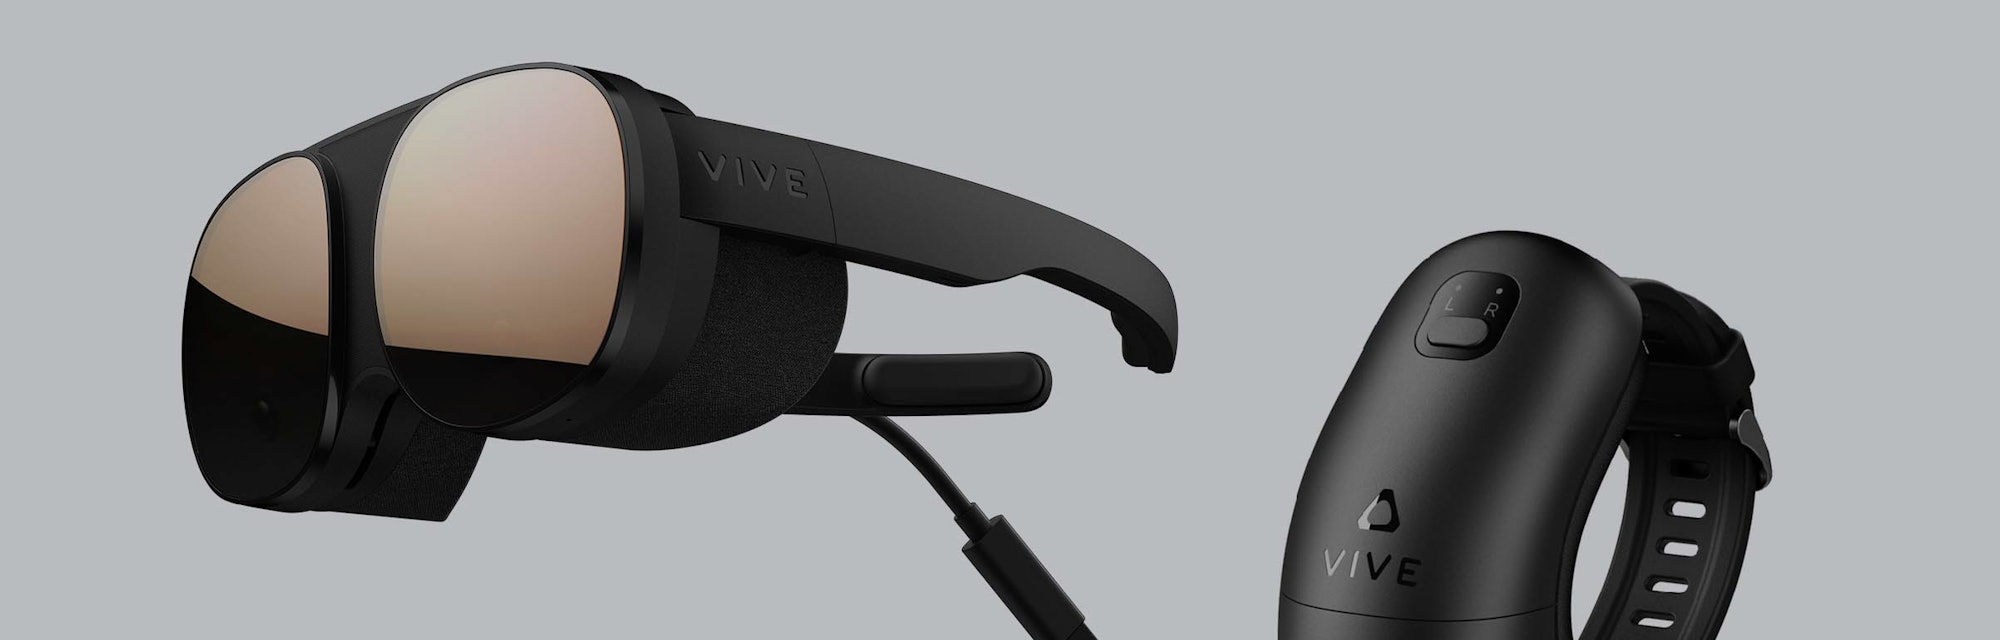 HTC's VIVE Flow and wrist tracker